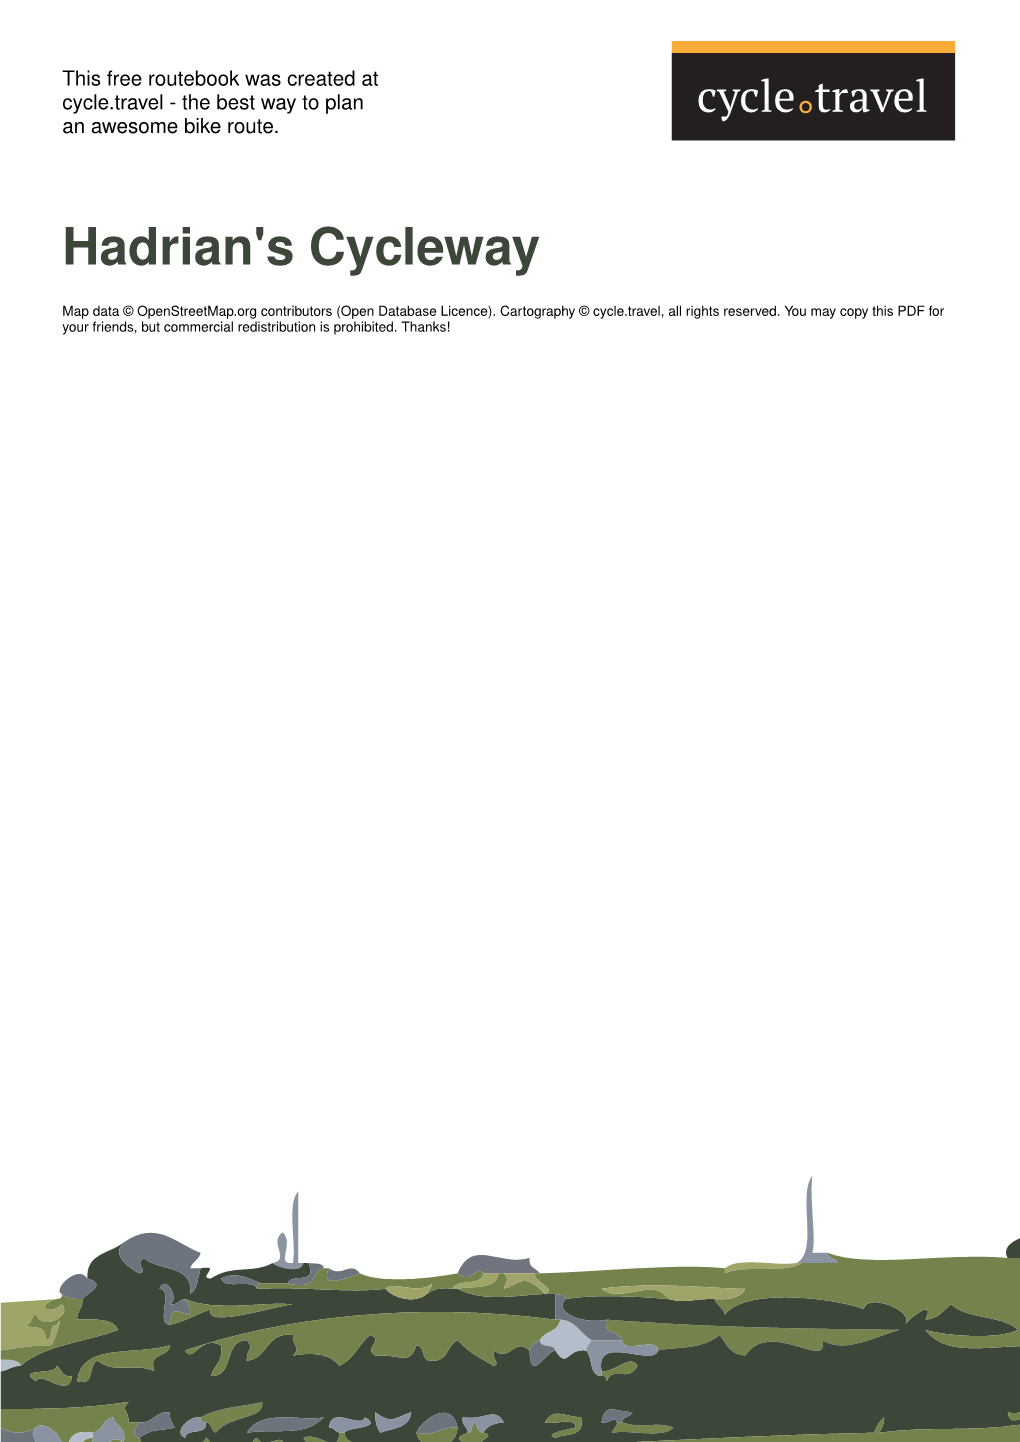 Hadrian's Cycleway